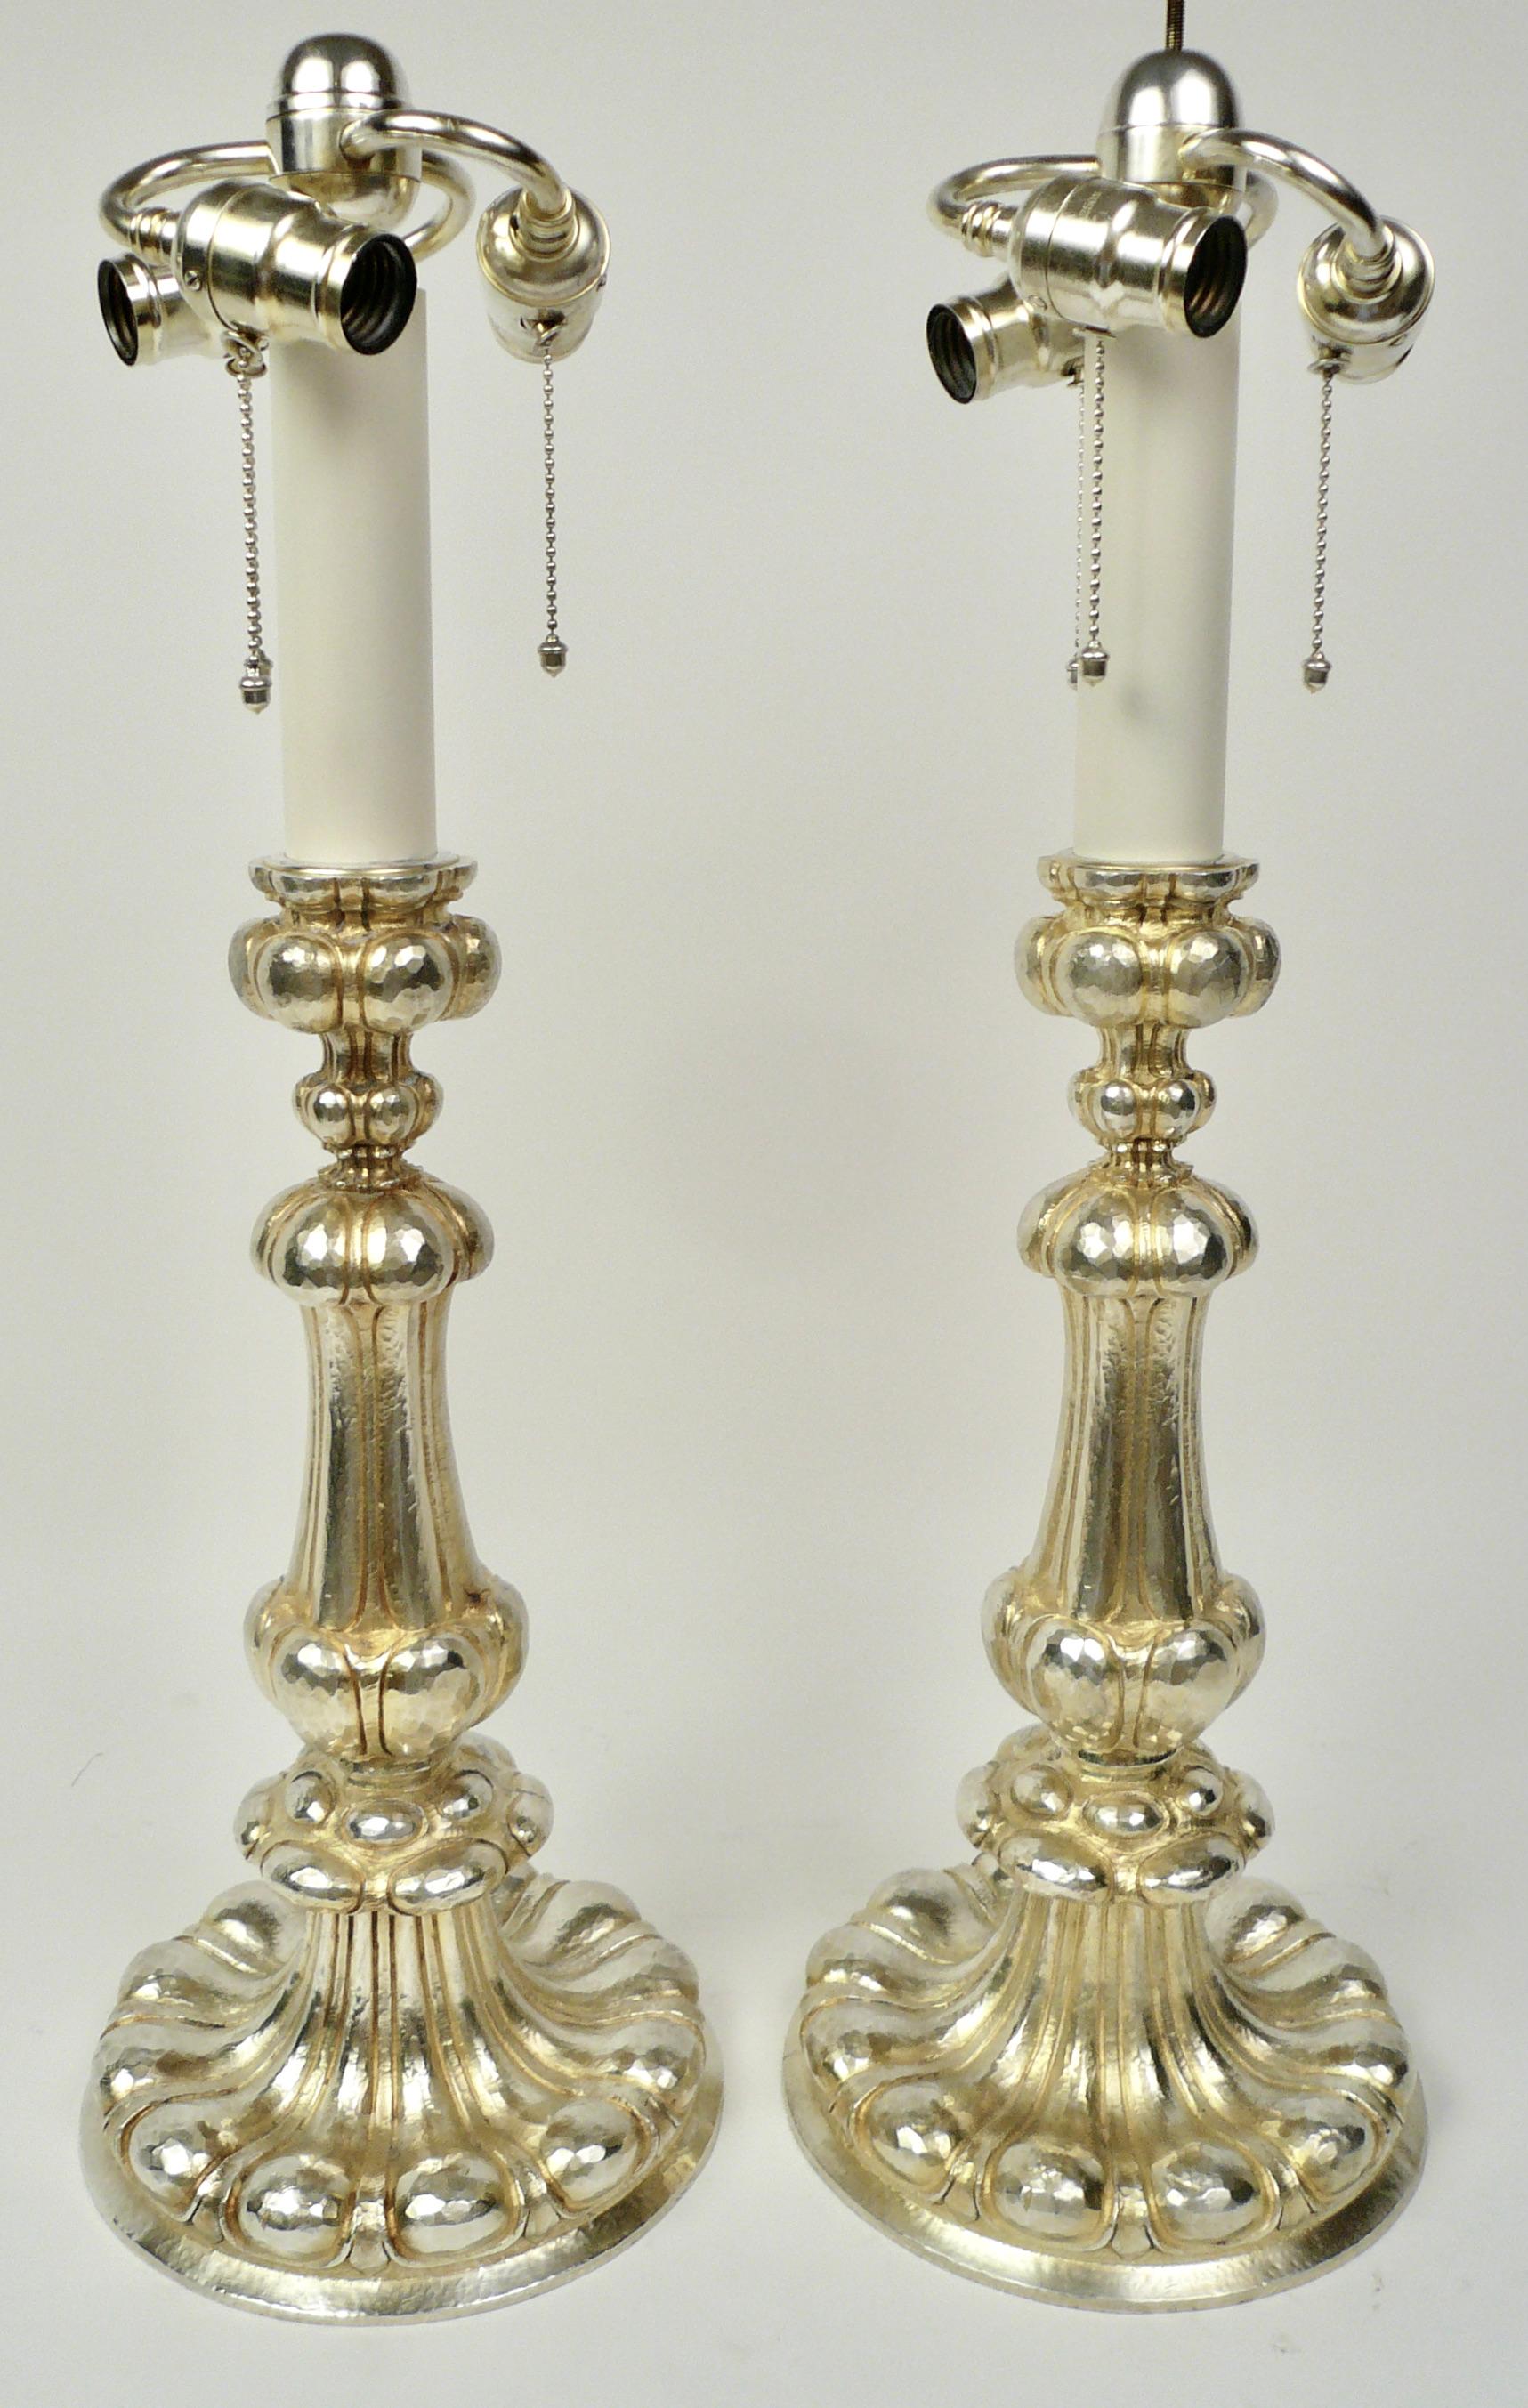 These hand hammered bronze pricket style lamps retain their original silver gilt finish.
Great for a Tudor style or Arts & Crafts interior, they are newly re-wired, and ready for use.